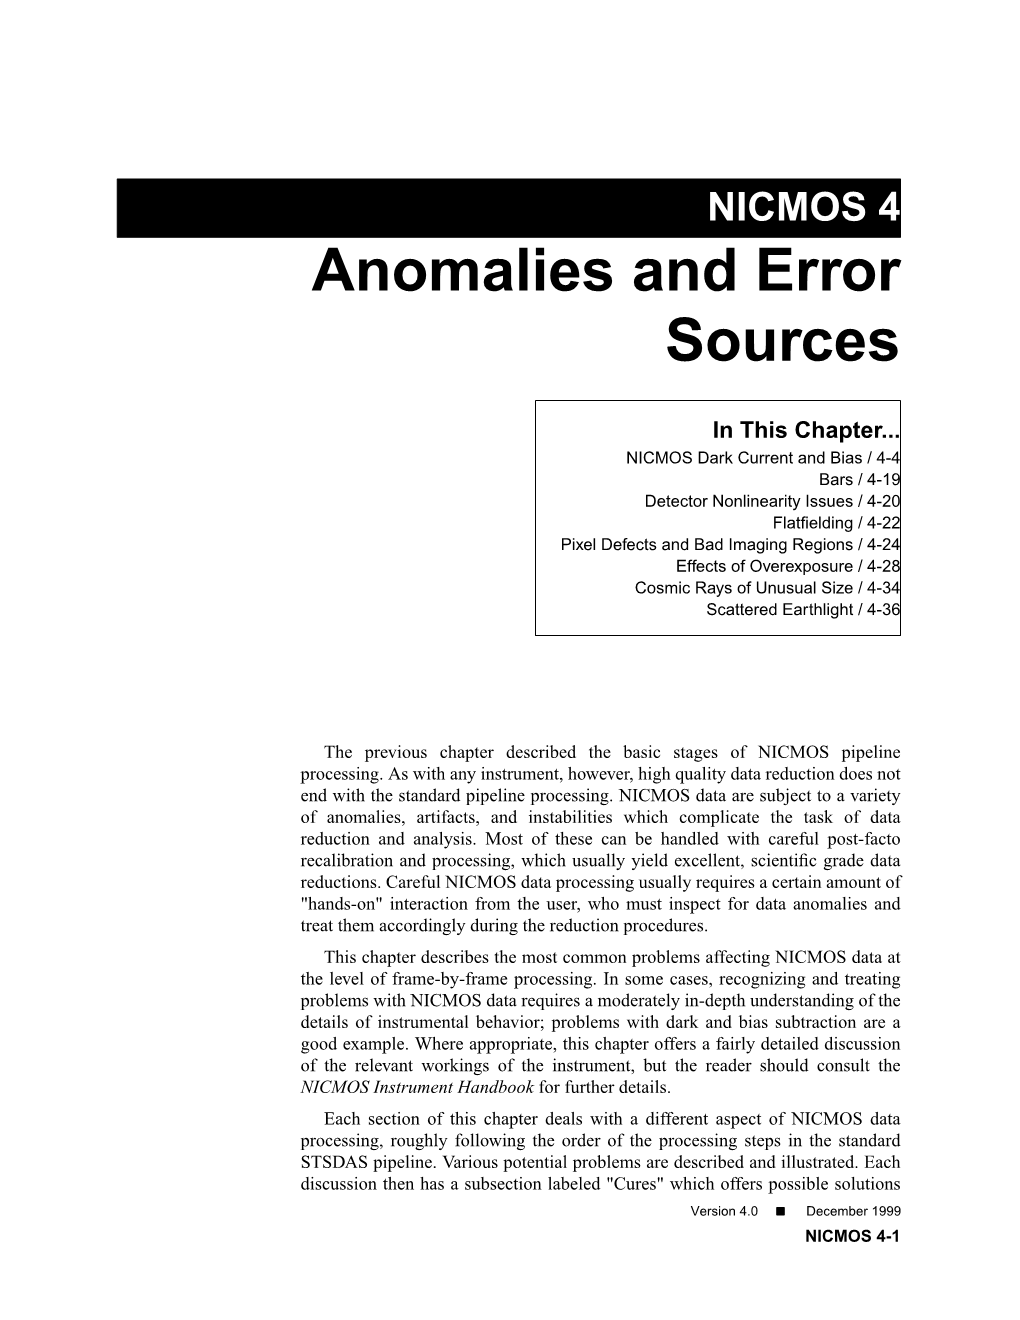 Anomalies and Error Sources